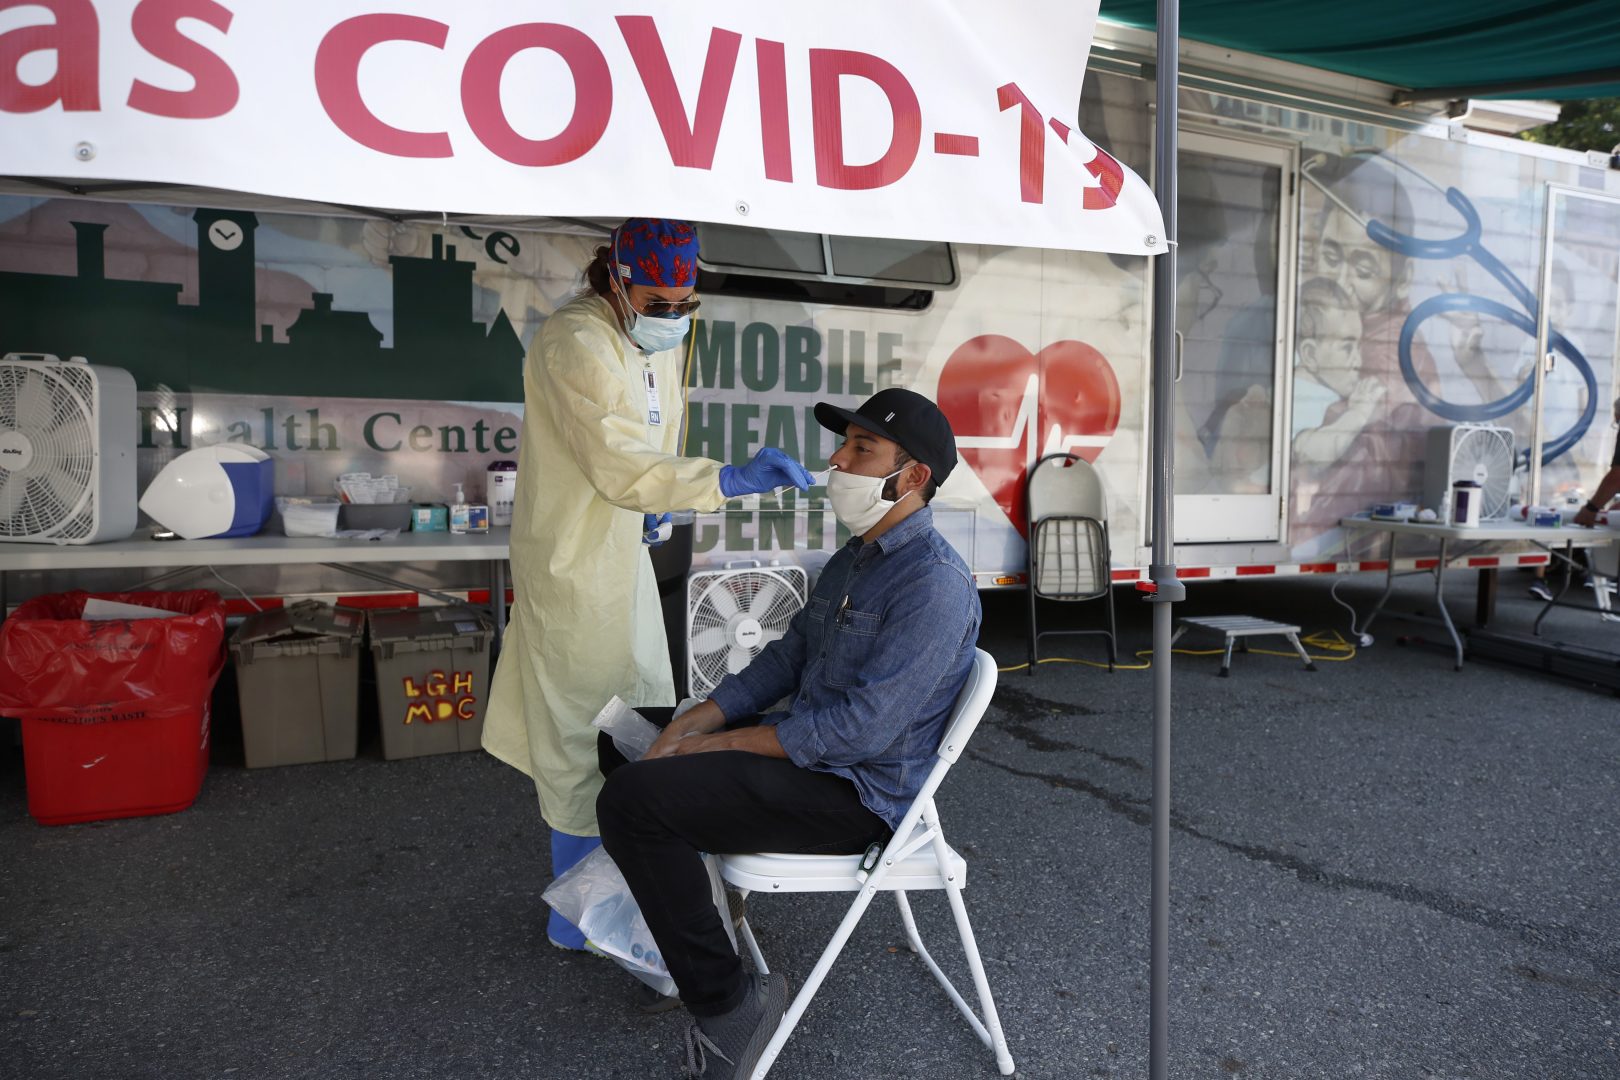 Nurse Tanya Markos administers a coronavirus test on patient Ricardo Sojuel at a mobile COVID-19 testing unit, Thursday, July 2, 2020, in Lawrence, Mass.